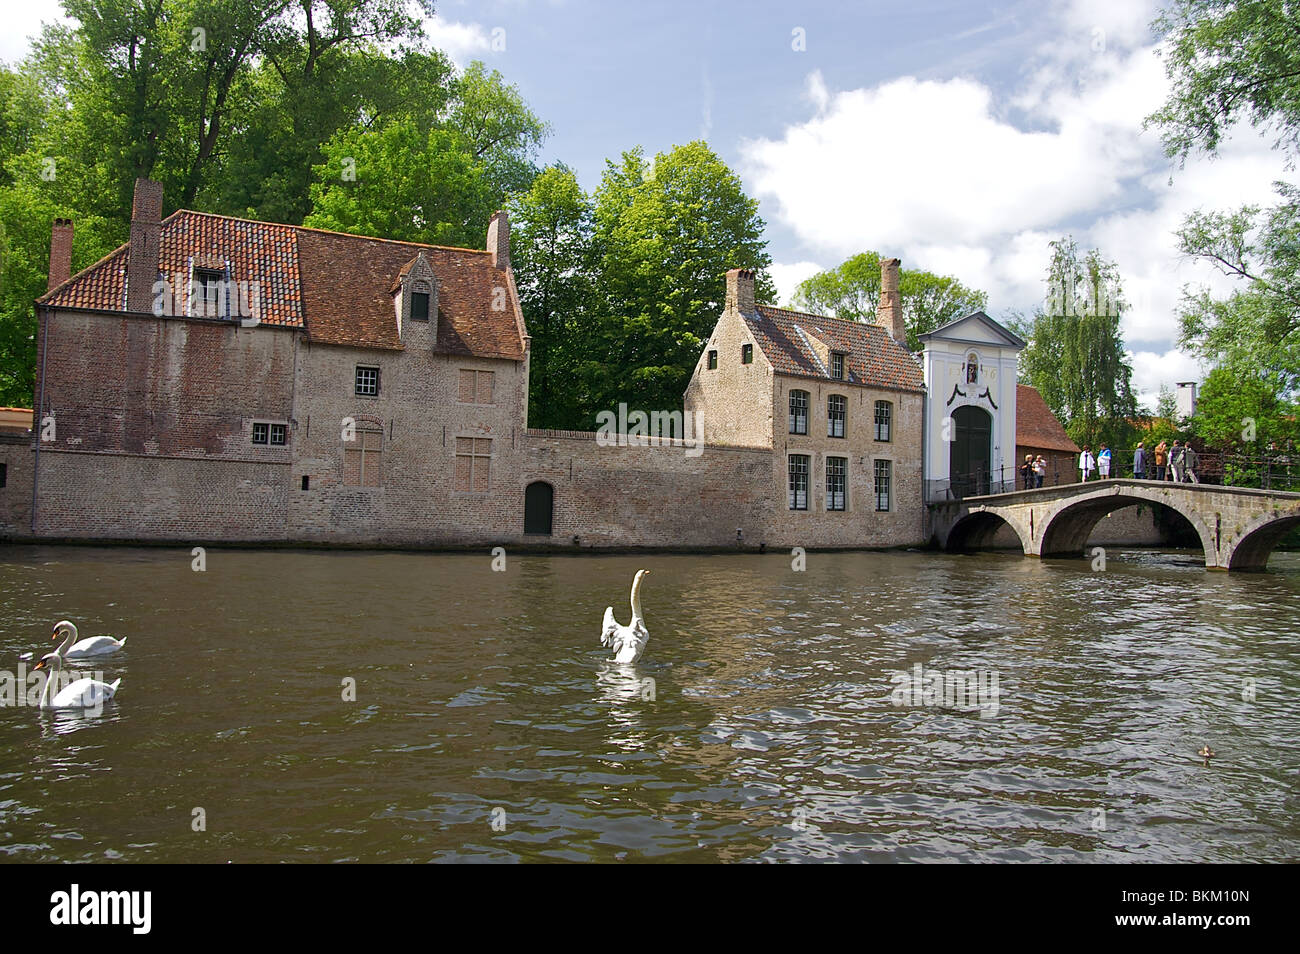 Swans in the water amidst historic architecture in Bruges, Belgium.  People on a bridge in the distance admire the view. Stock Photo